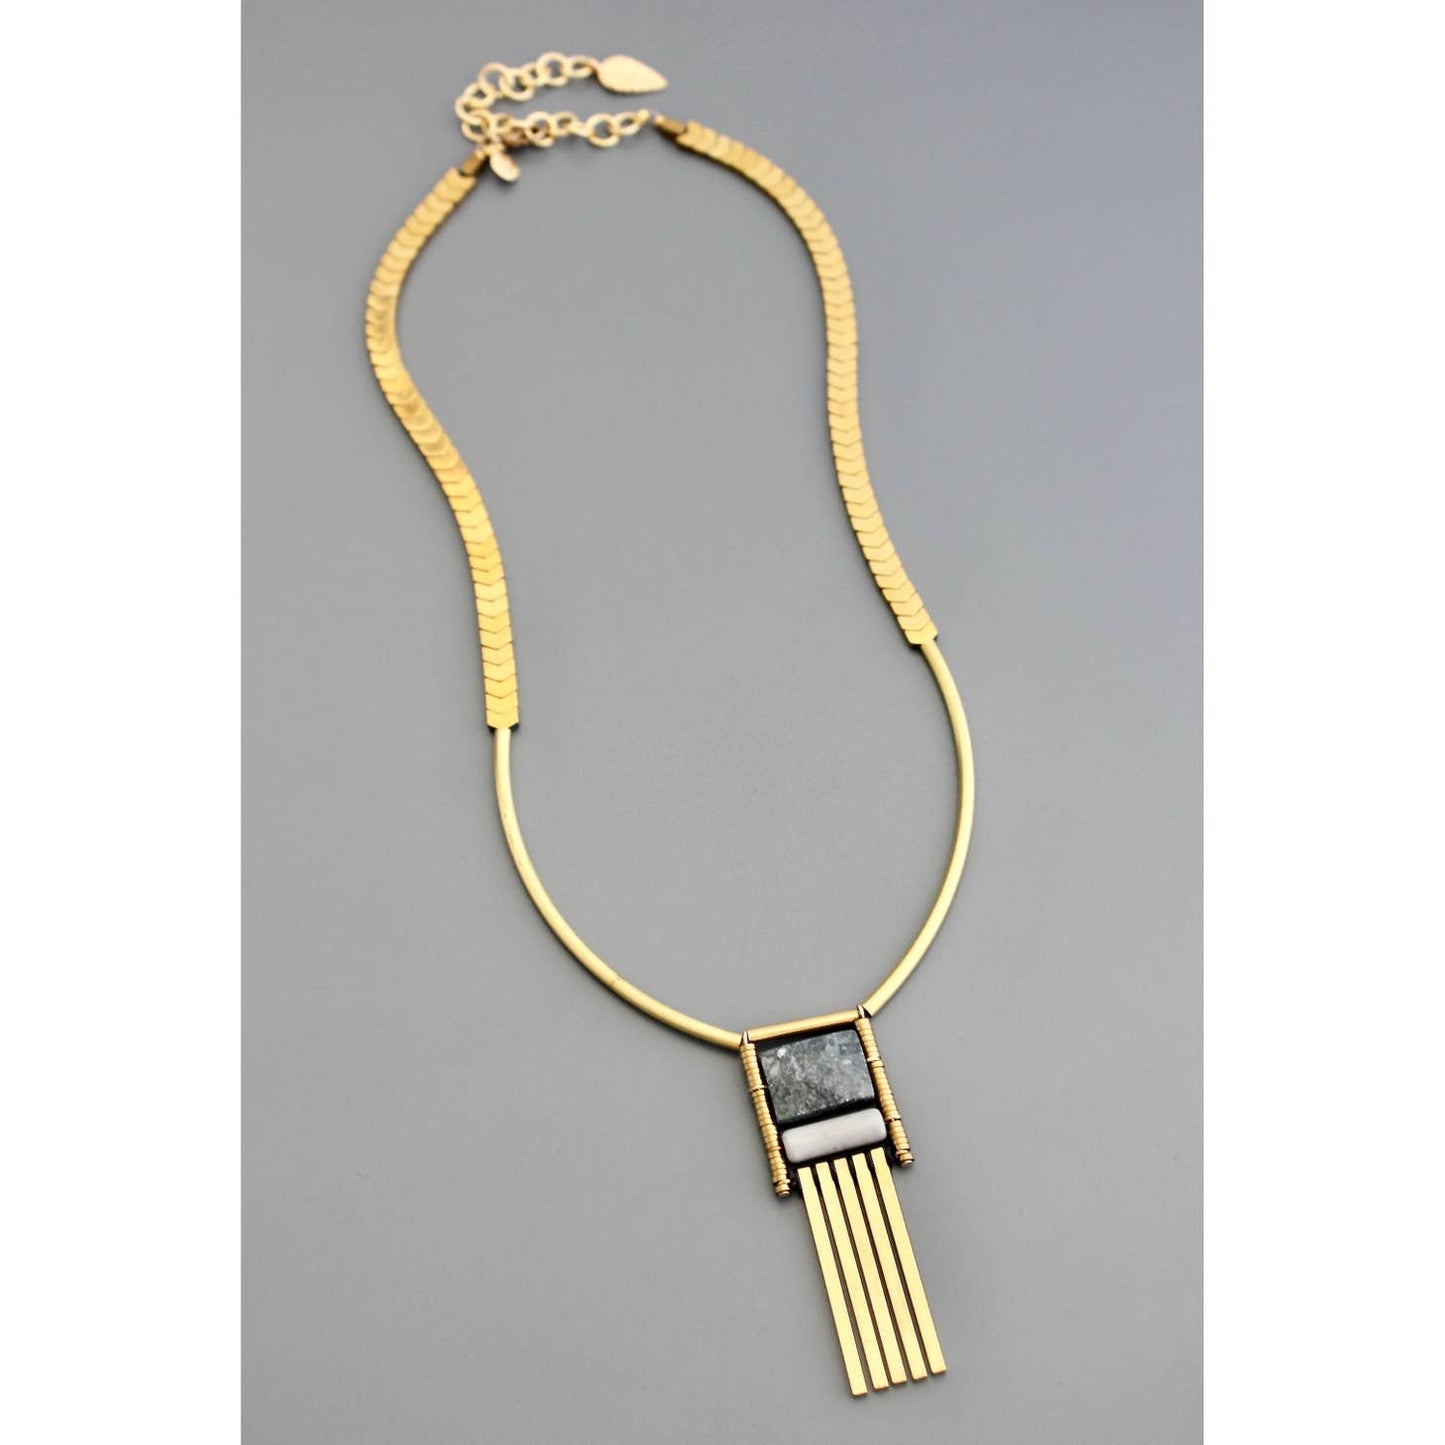 Geometric Stone and Gold Necklace